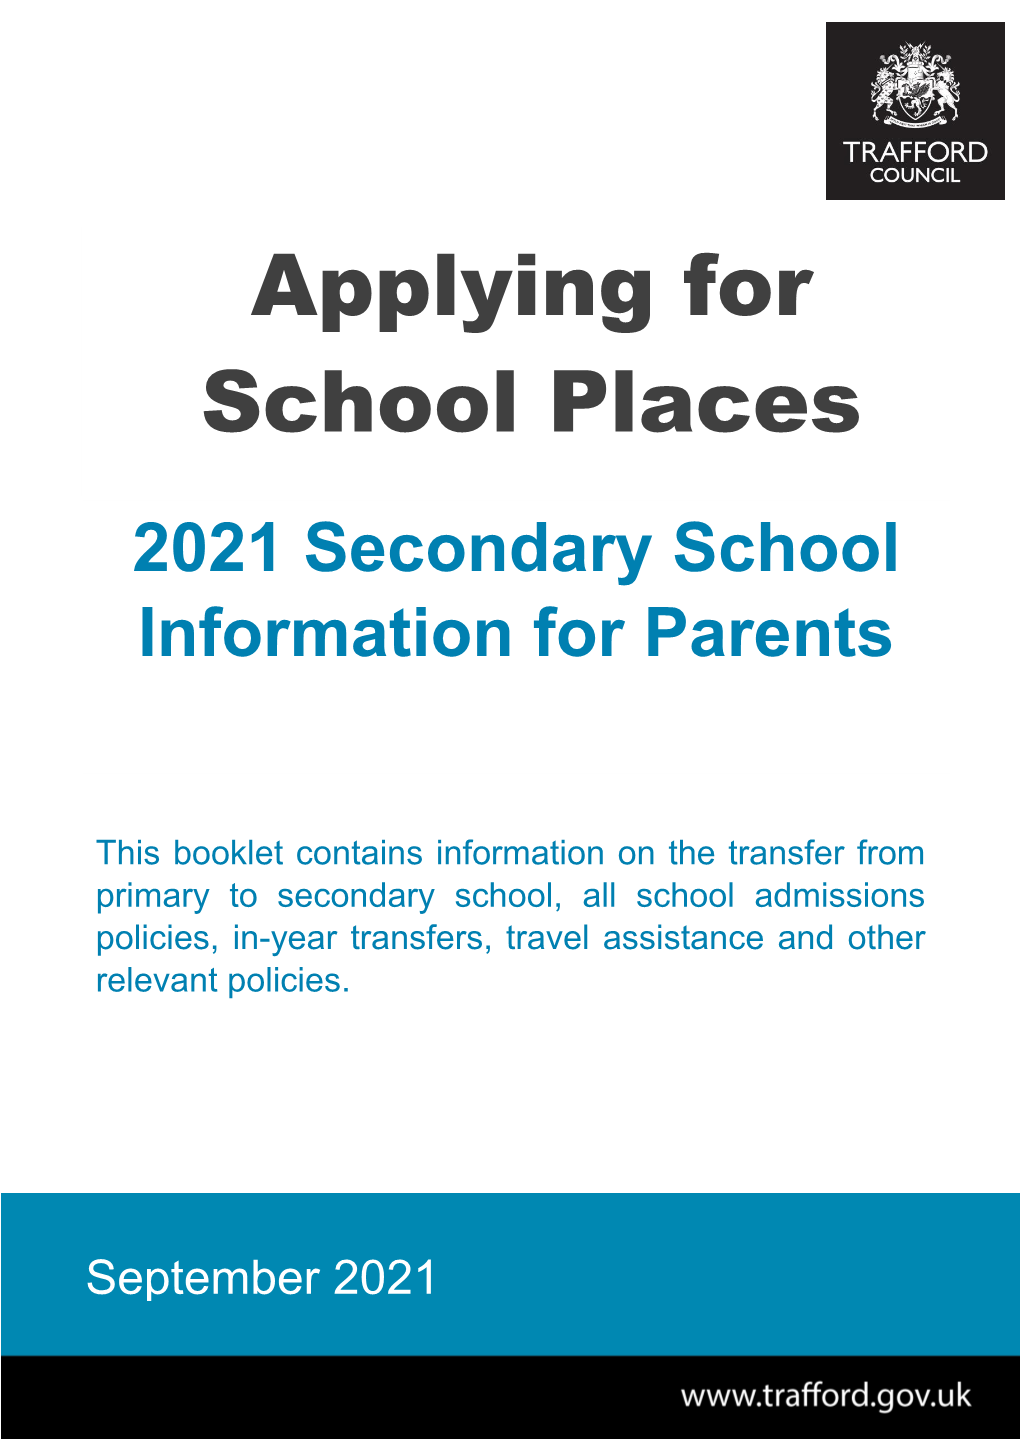 Applying for School Places 2021 Secondary School Information for Parents